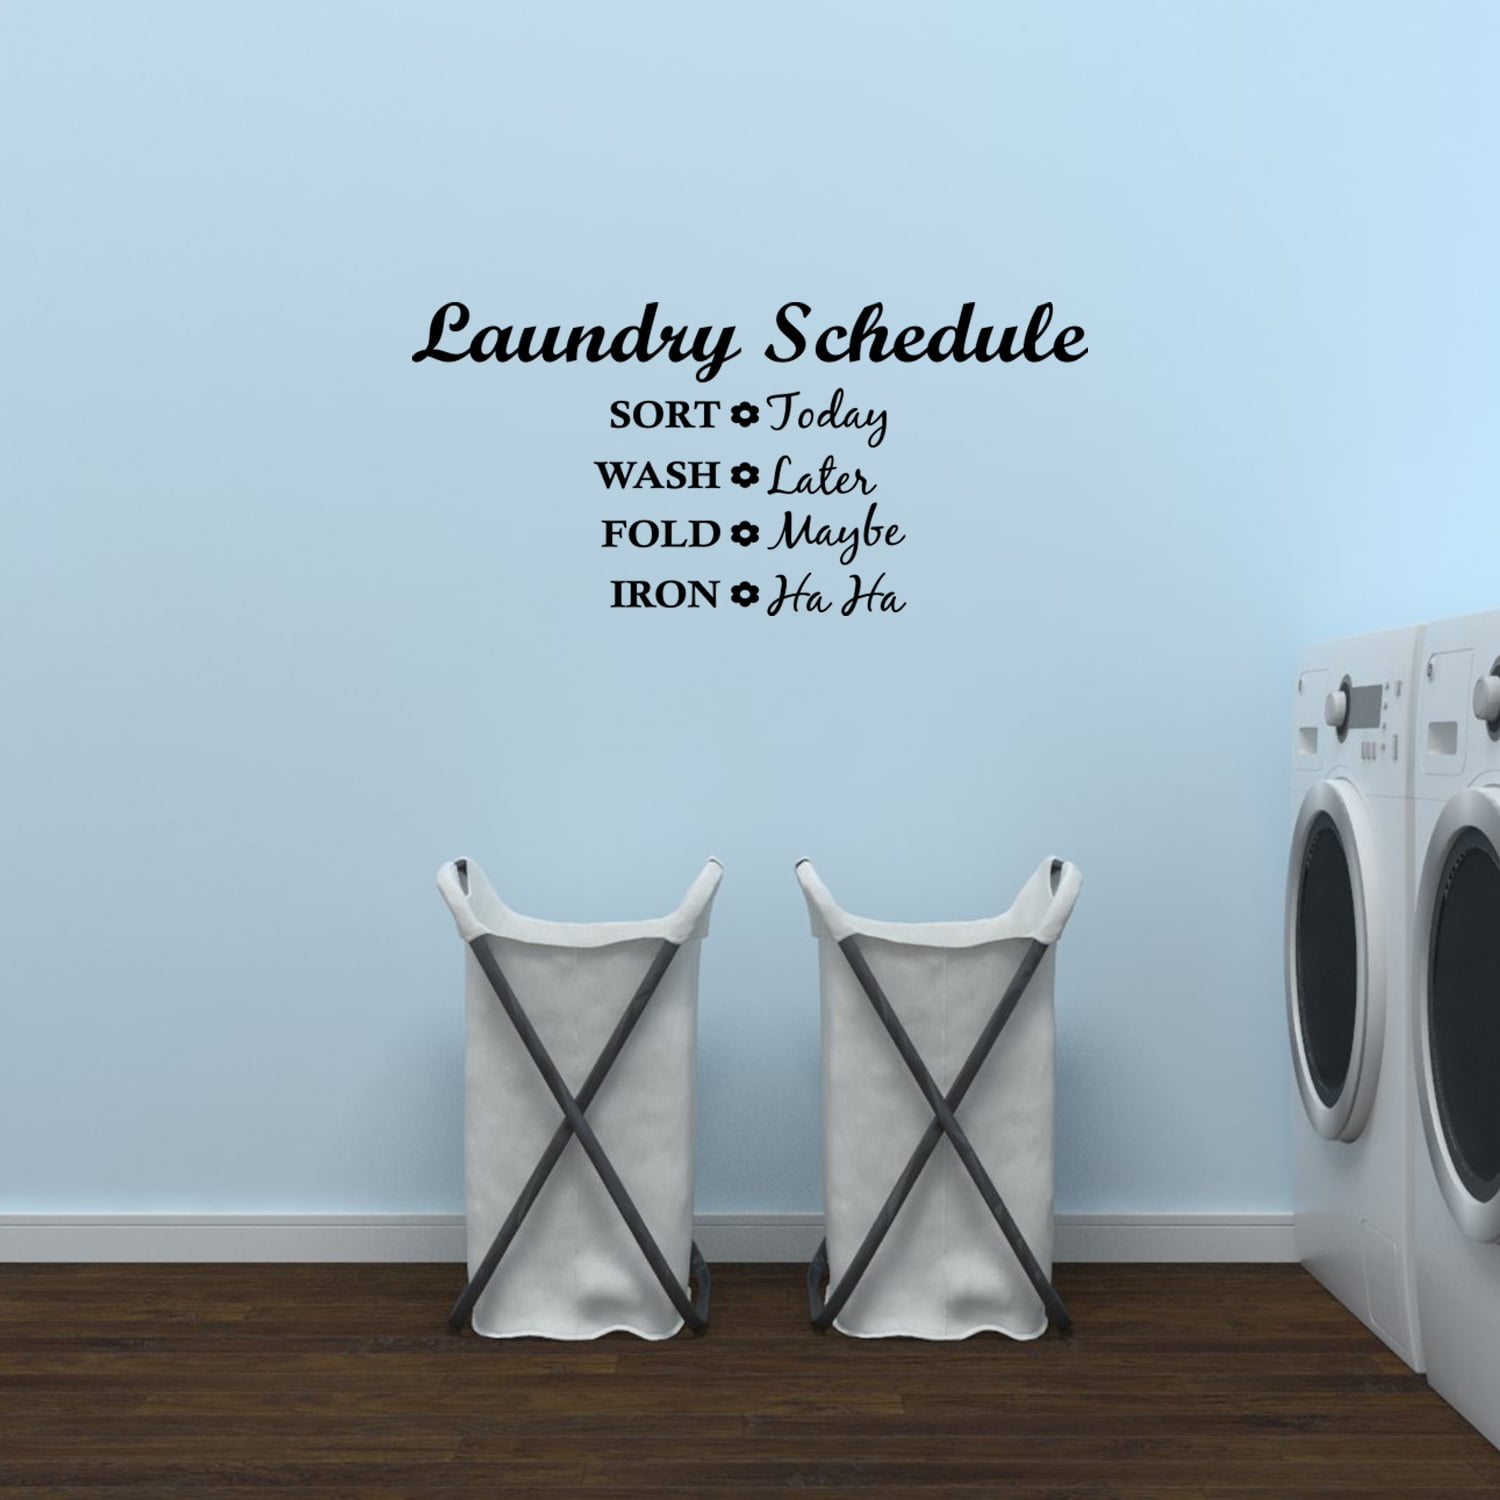 SELF SERVE LAUNDRY ROOM WALL DECAL QUOTE VINYL DECOR WORDS LETTERING STICKER 